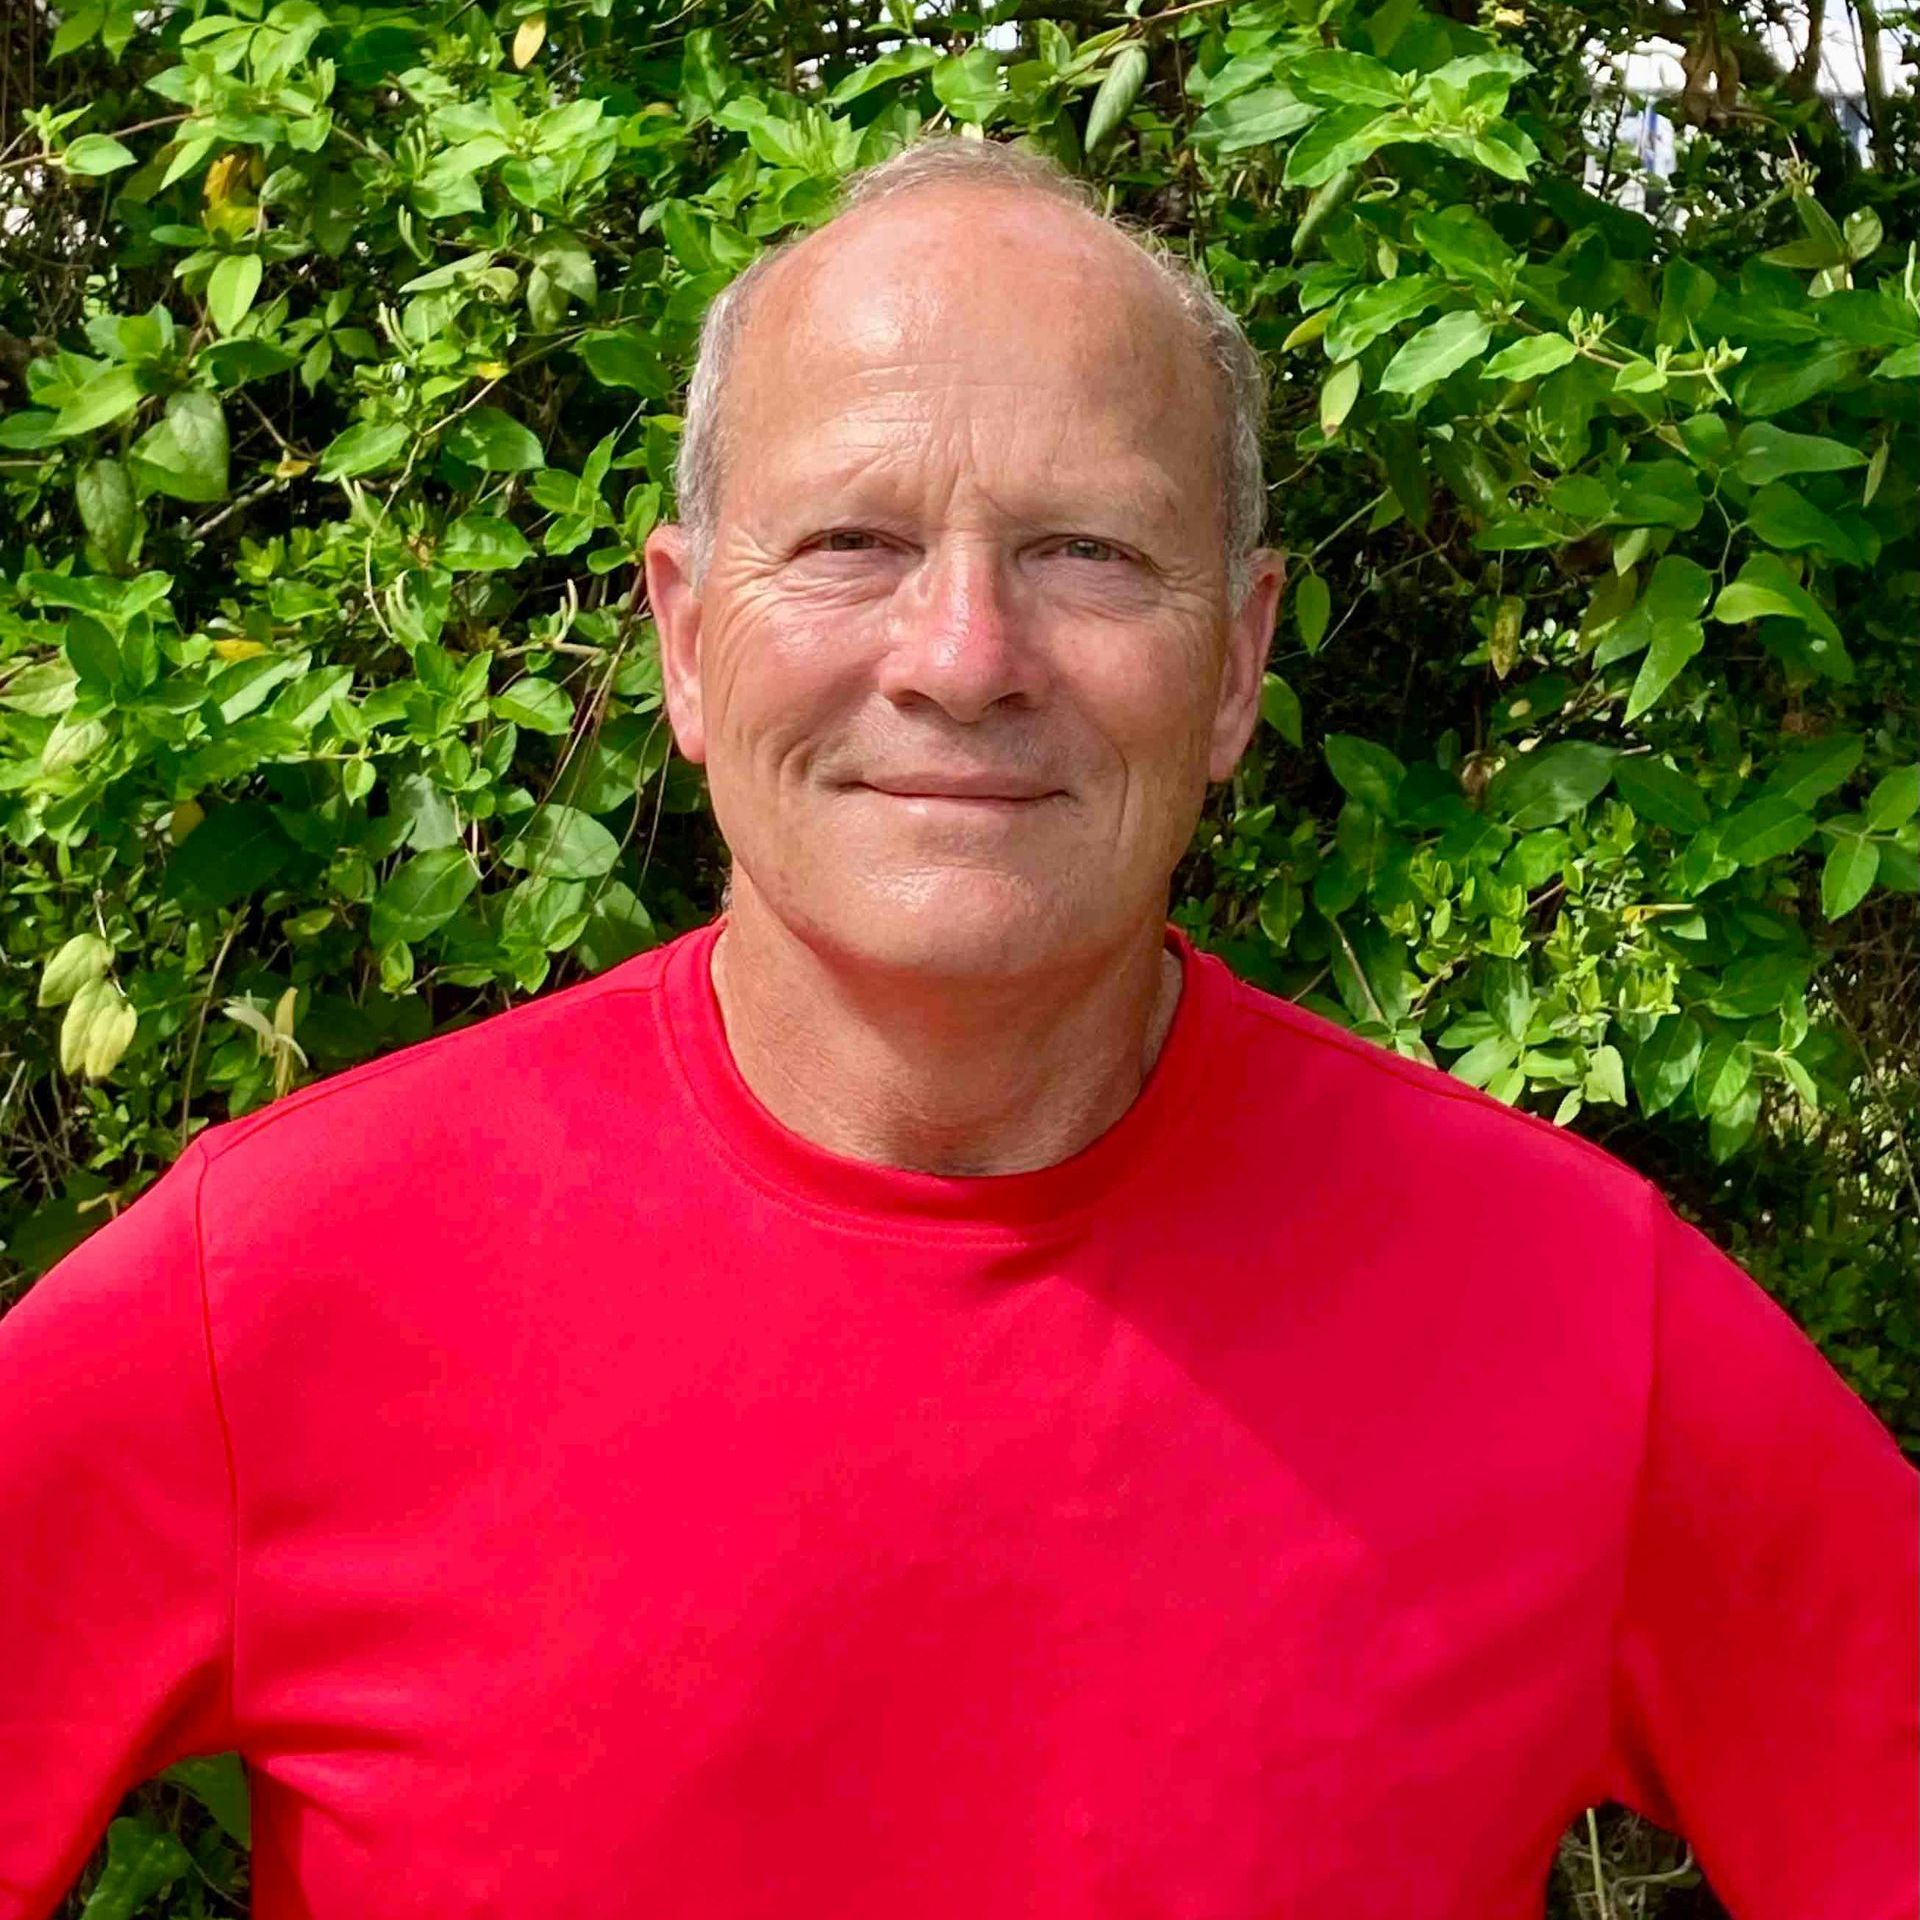 A man in a red shirt is standing in front of a bush.